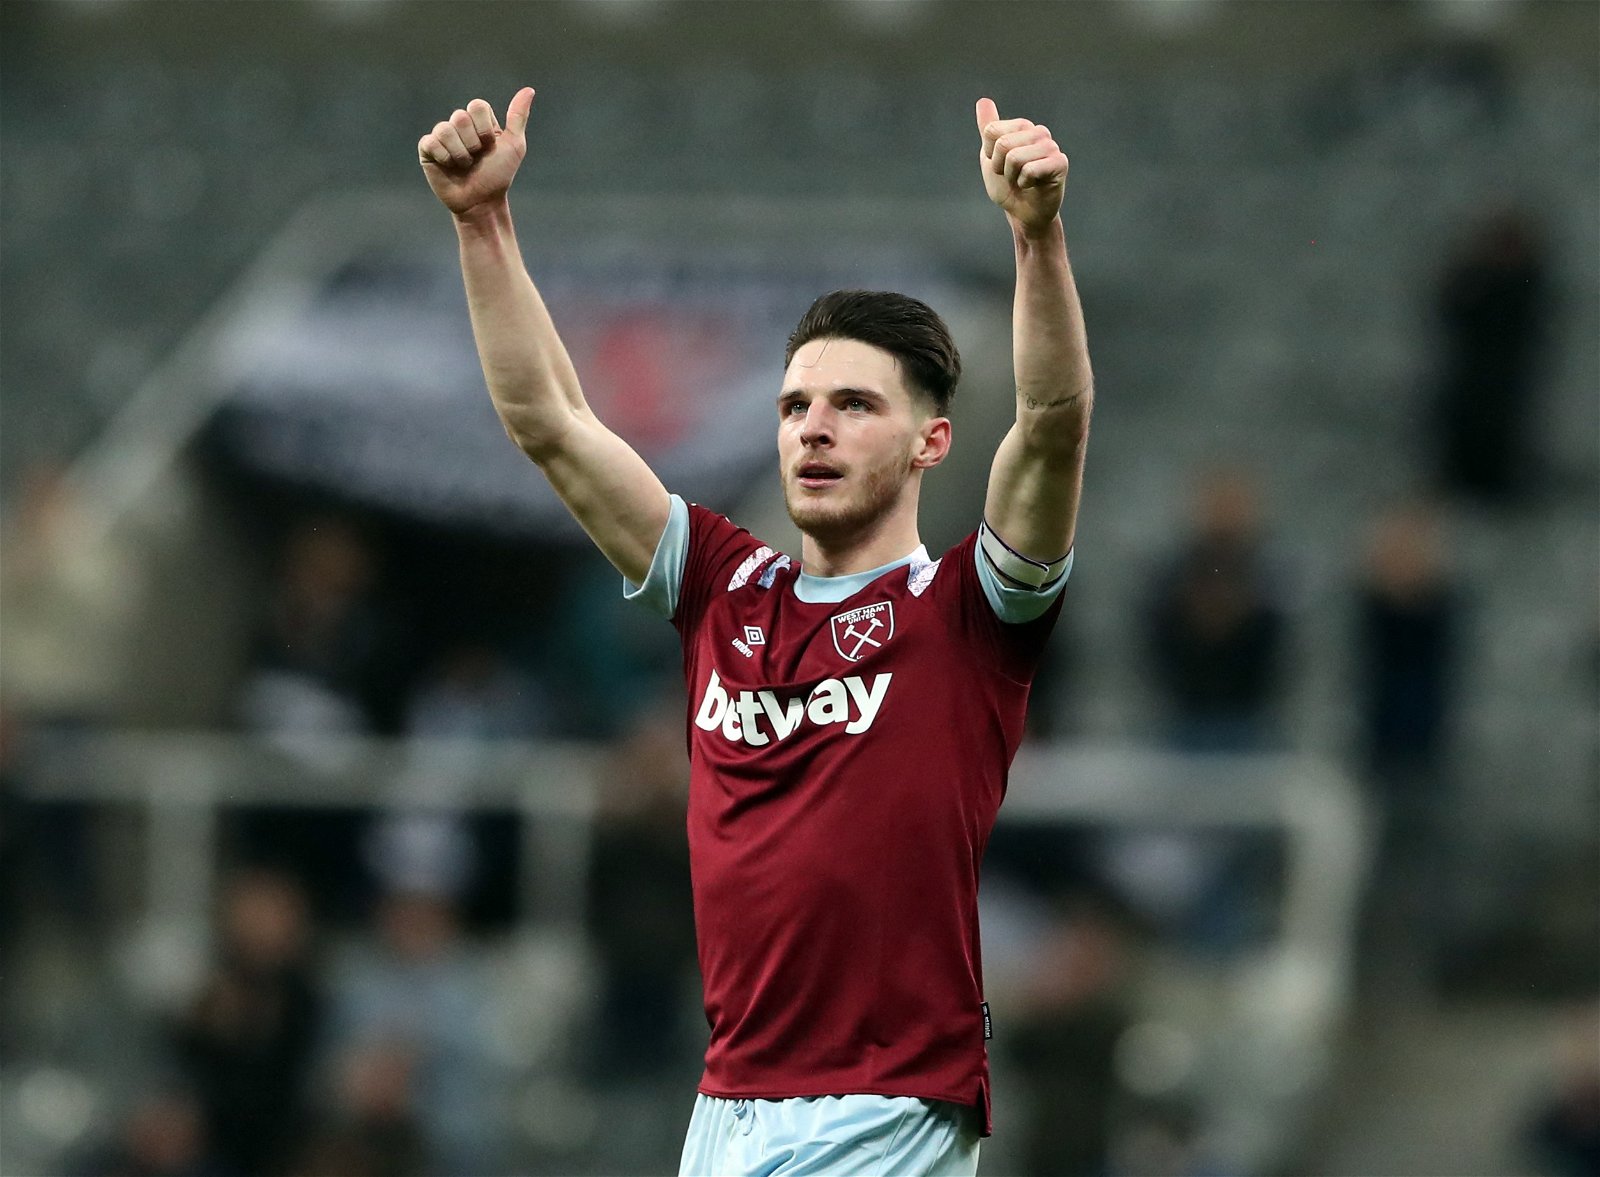 Arsenal have made contact about signing Declan Rice